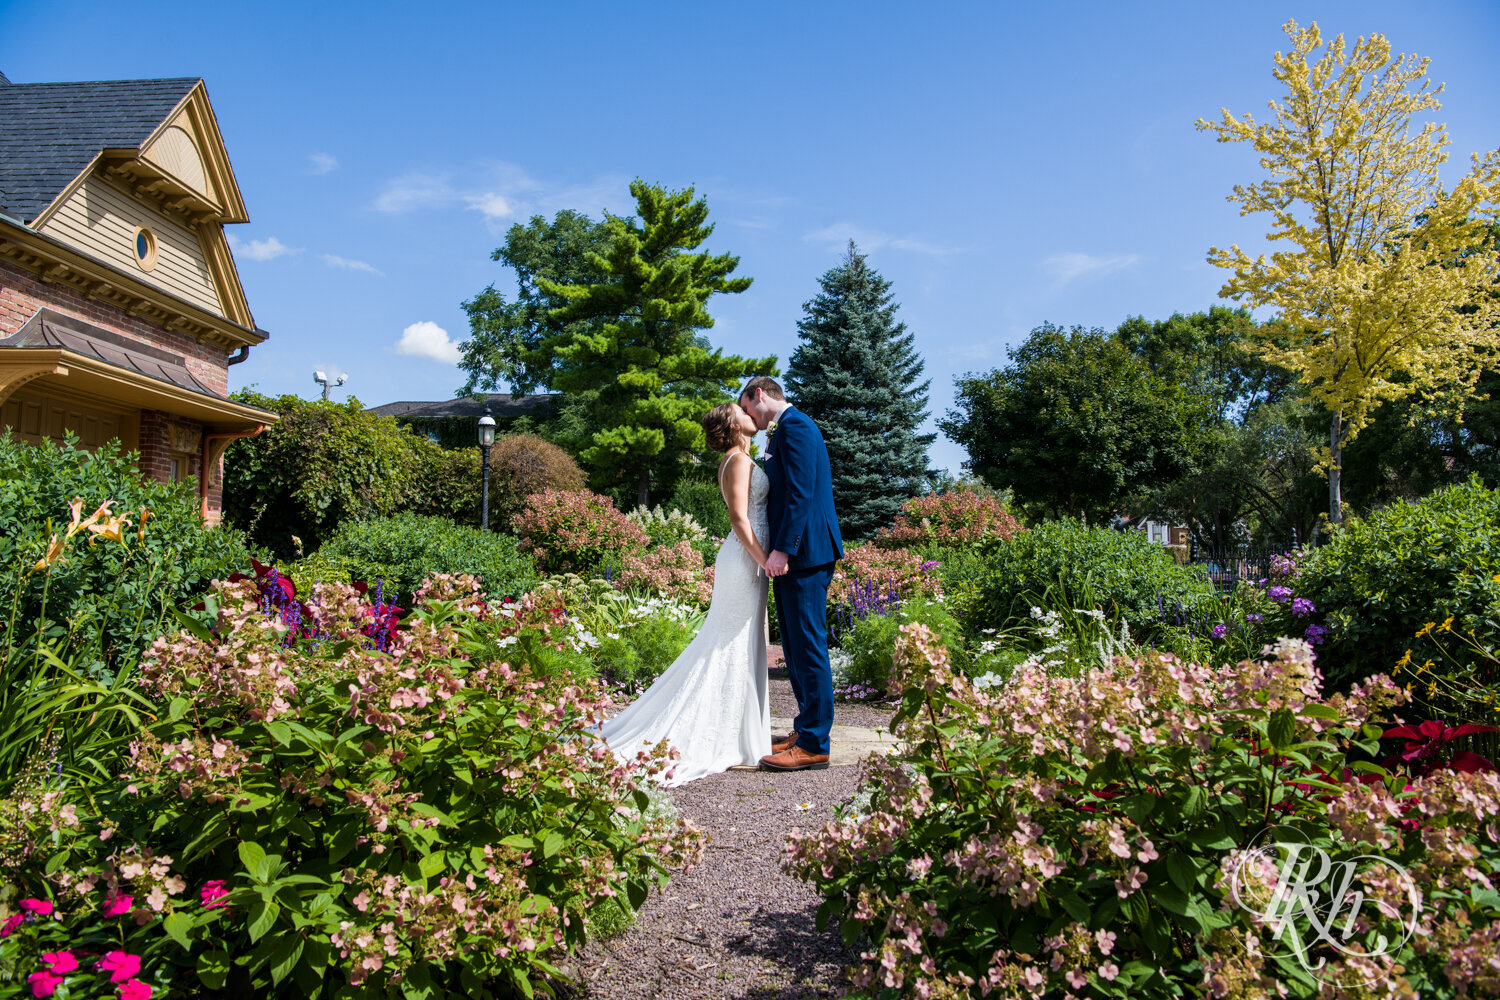 Bride and groom kiss on sunny day in Mankato, Minnesota.